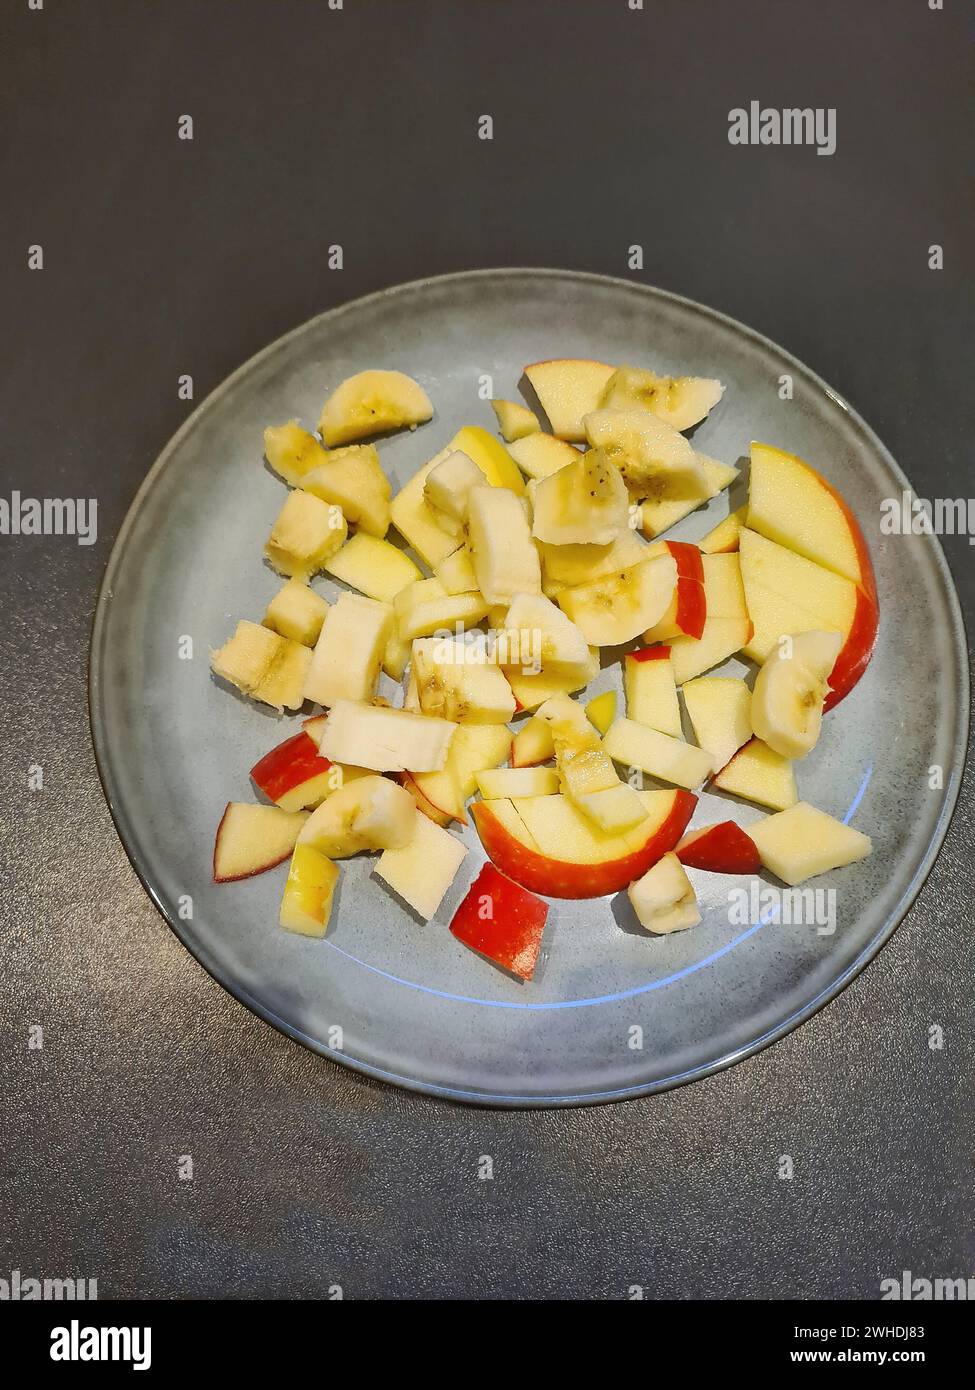 Pieces of apple with red apple skin cut into small pieces as a fruit salad on a light blue plate Stock Photo